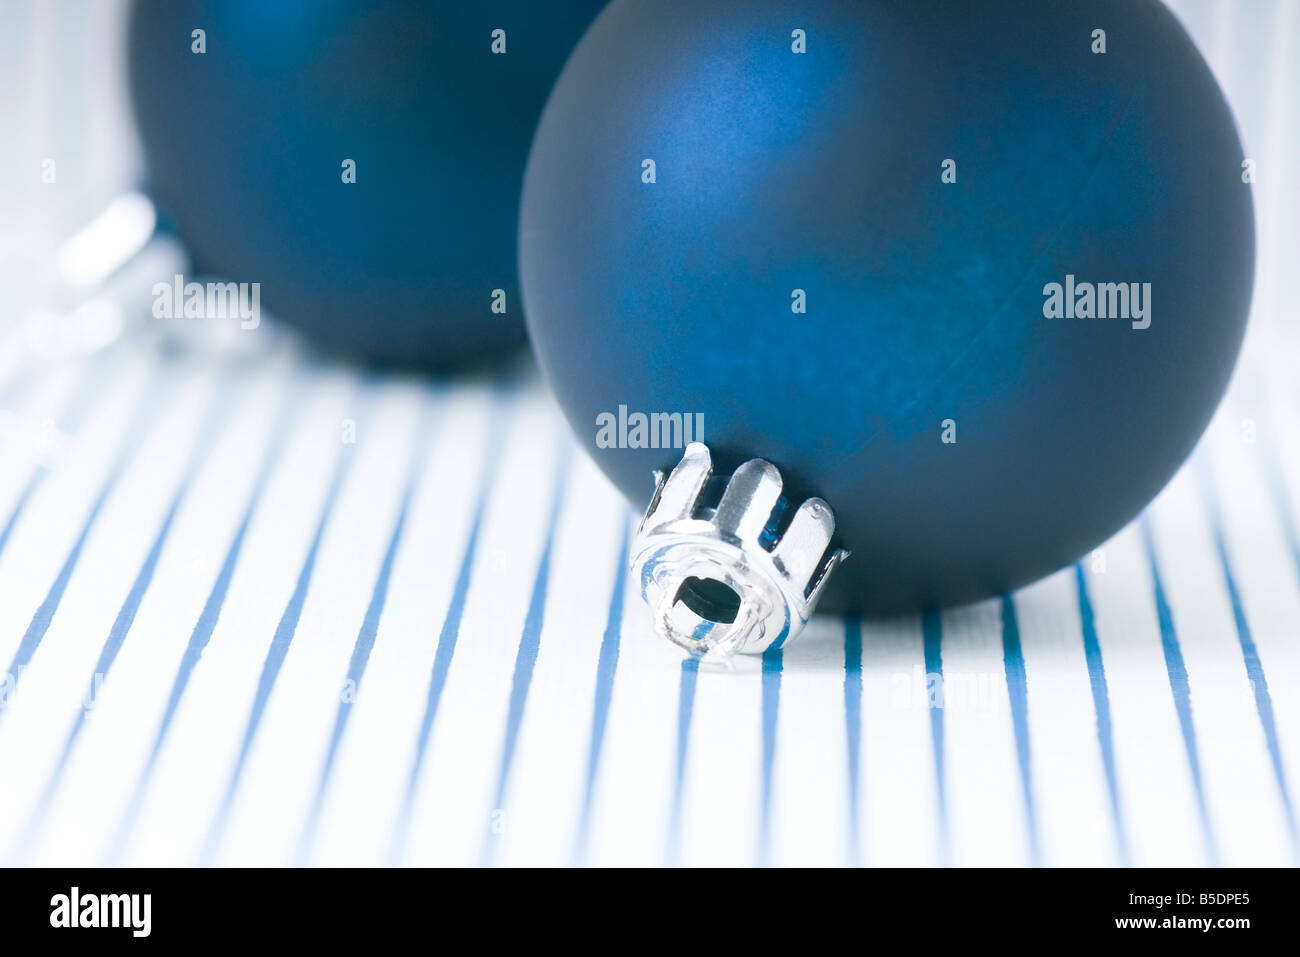 Two blue Christmas tree ornaments Stock Photo